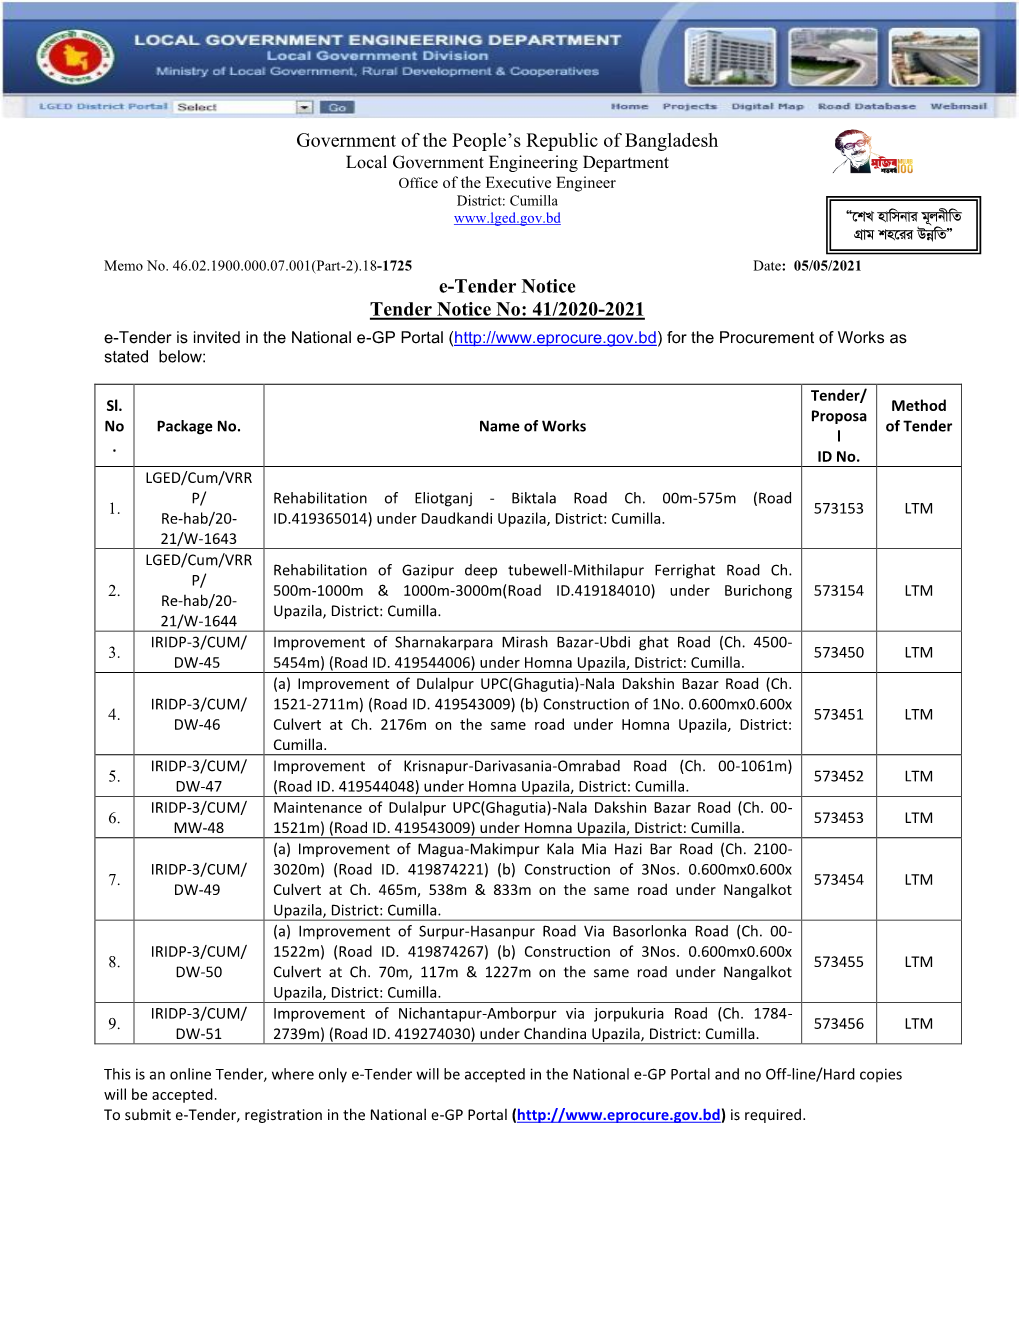 Government of the People's Republic of Bangladesh E-Tender Notice Tender Notice No: 41/2020-2021